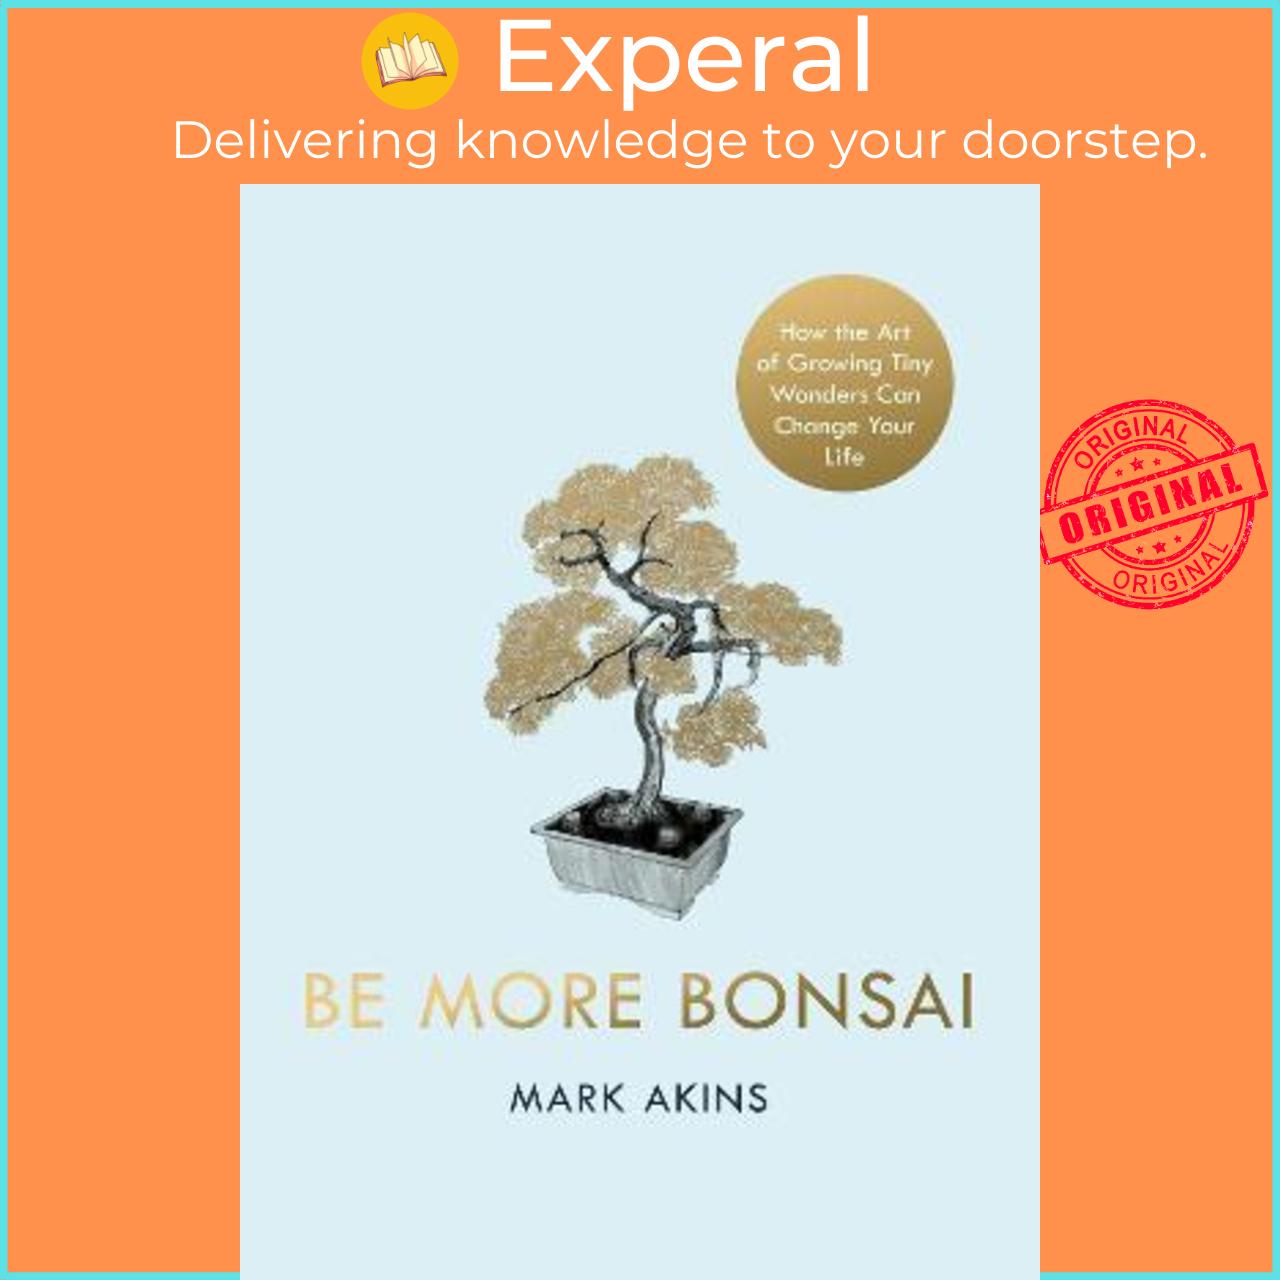 Sách - Be More Bonsai : Change your life with the mindful practice of growing bons by Mark Akins (UK edition, hardcover)